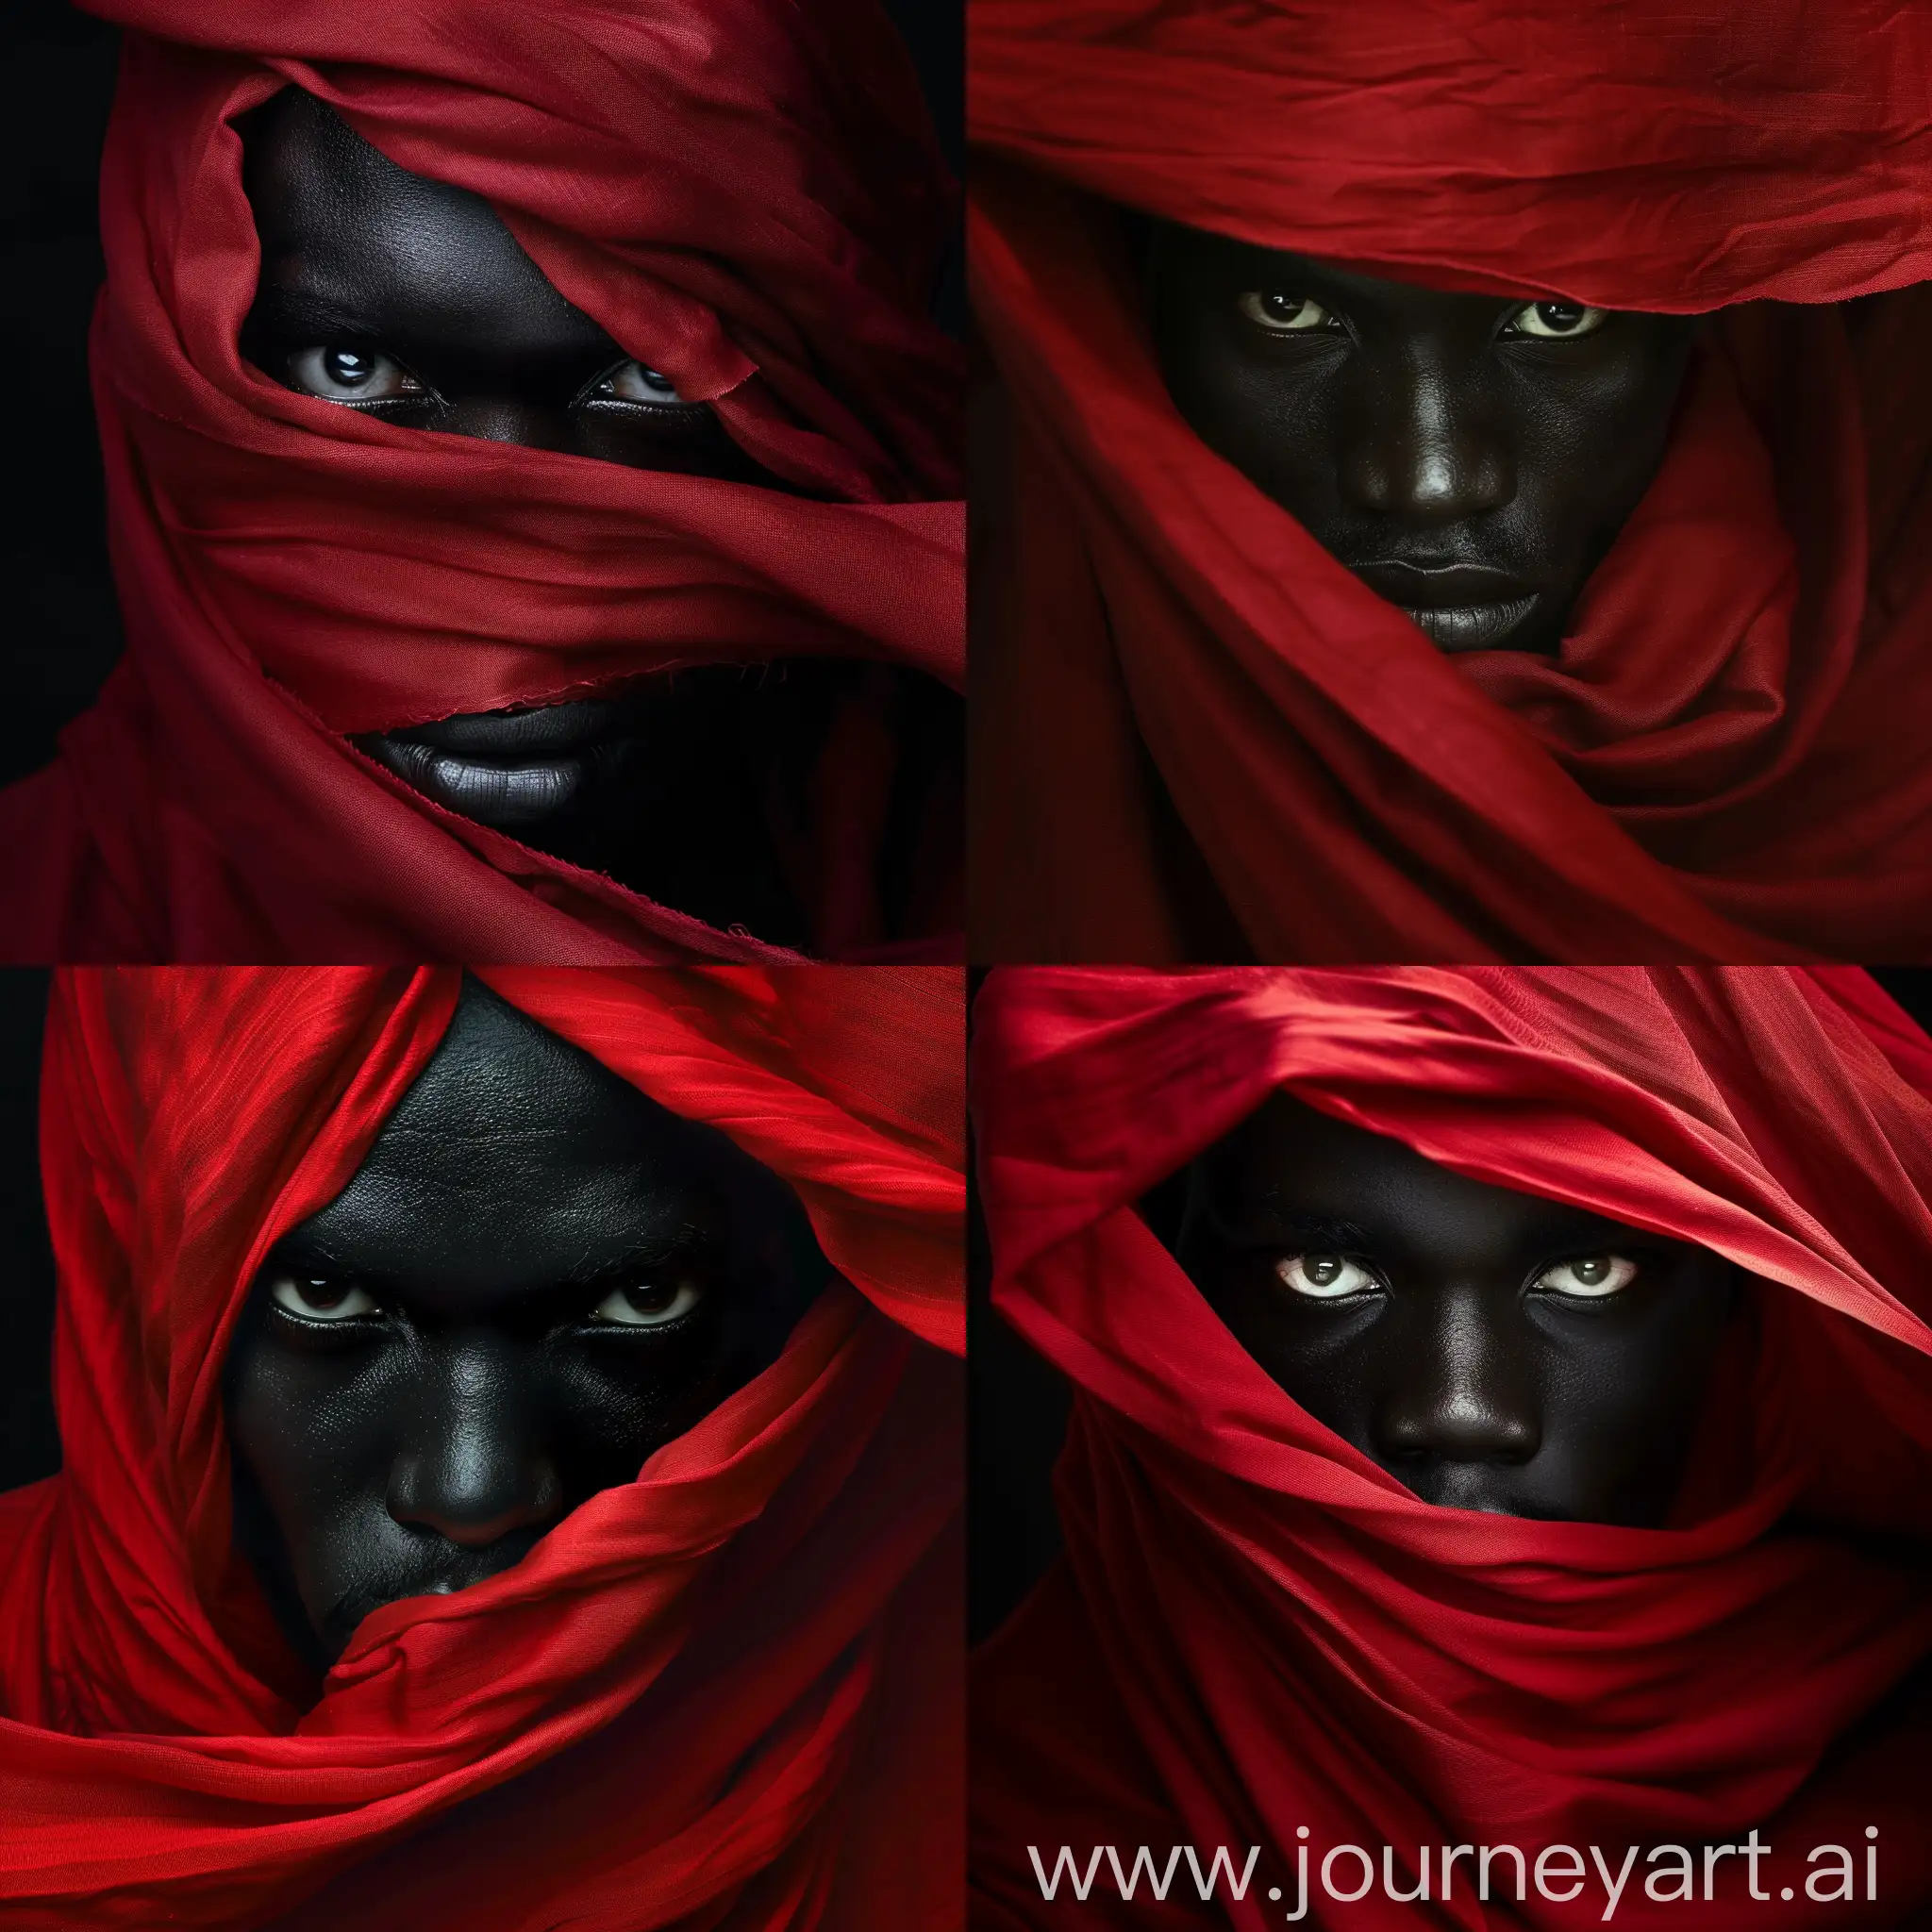 Mysterious-Black-Man-with-Red-Cloth-Veil-Intense-Gaze-and-Veiled-Identity